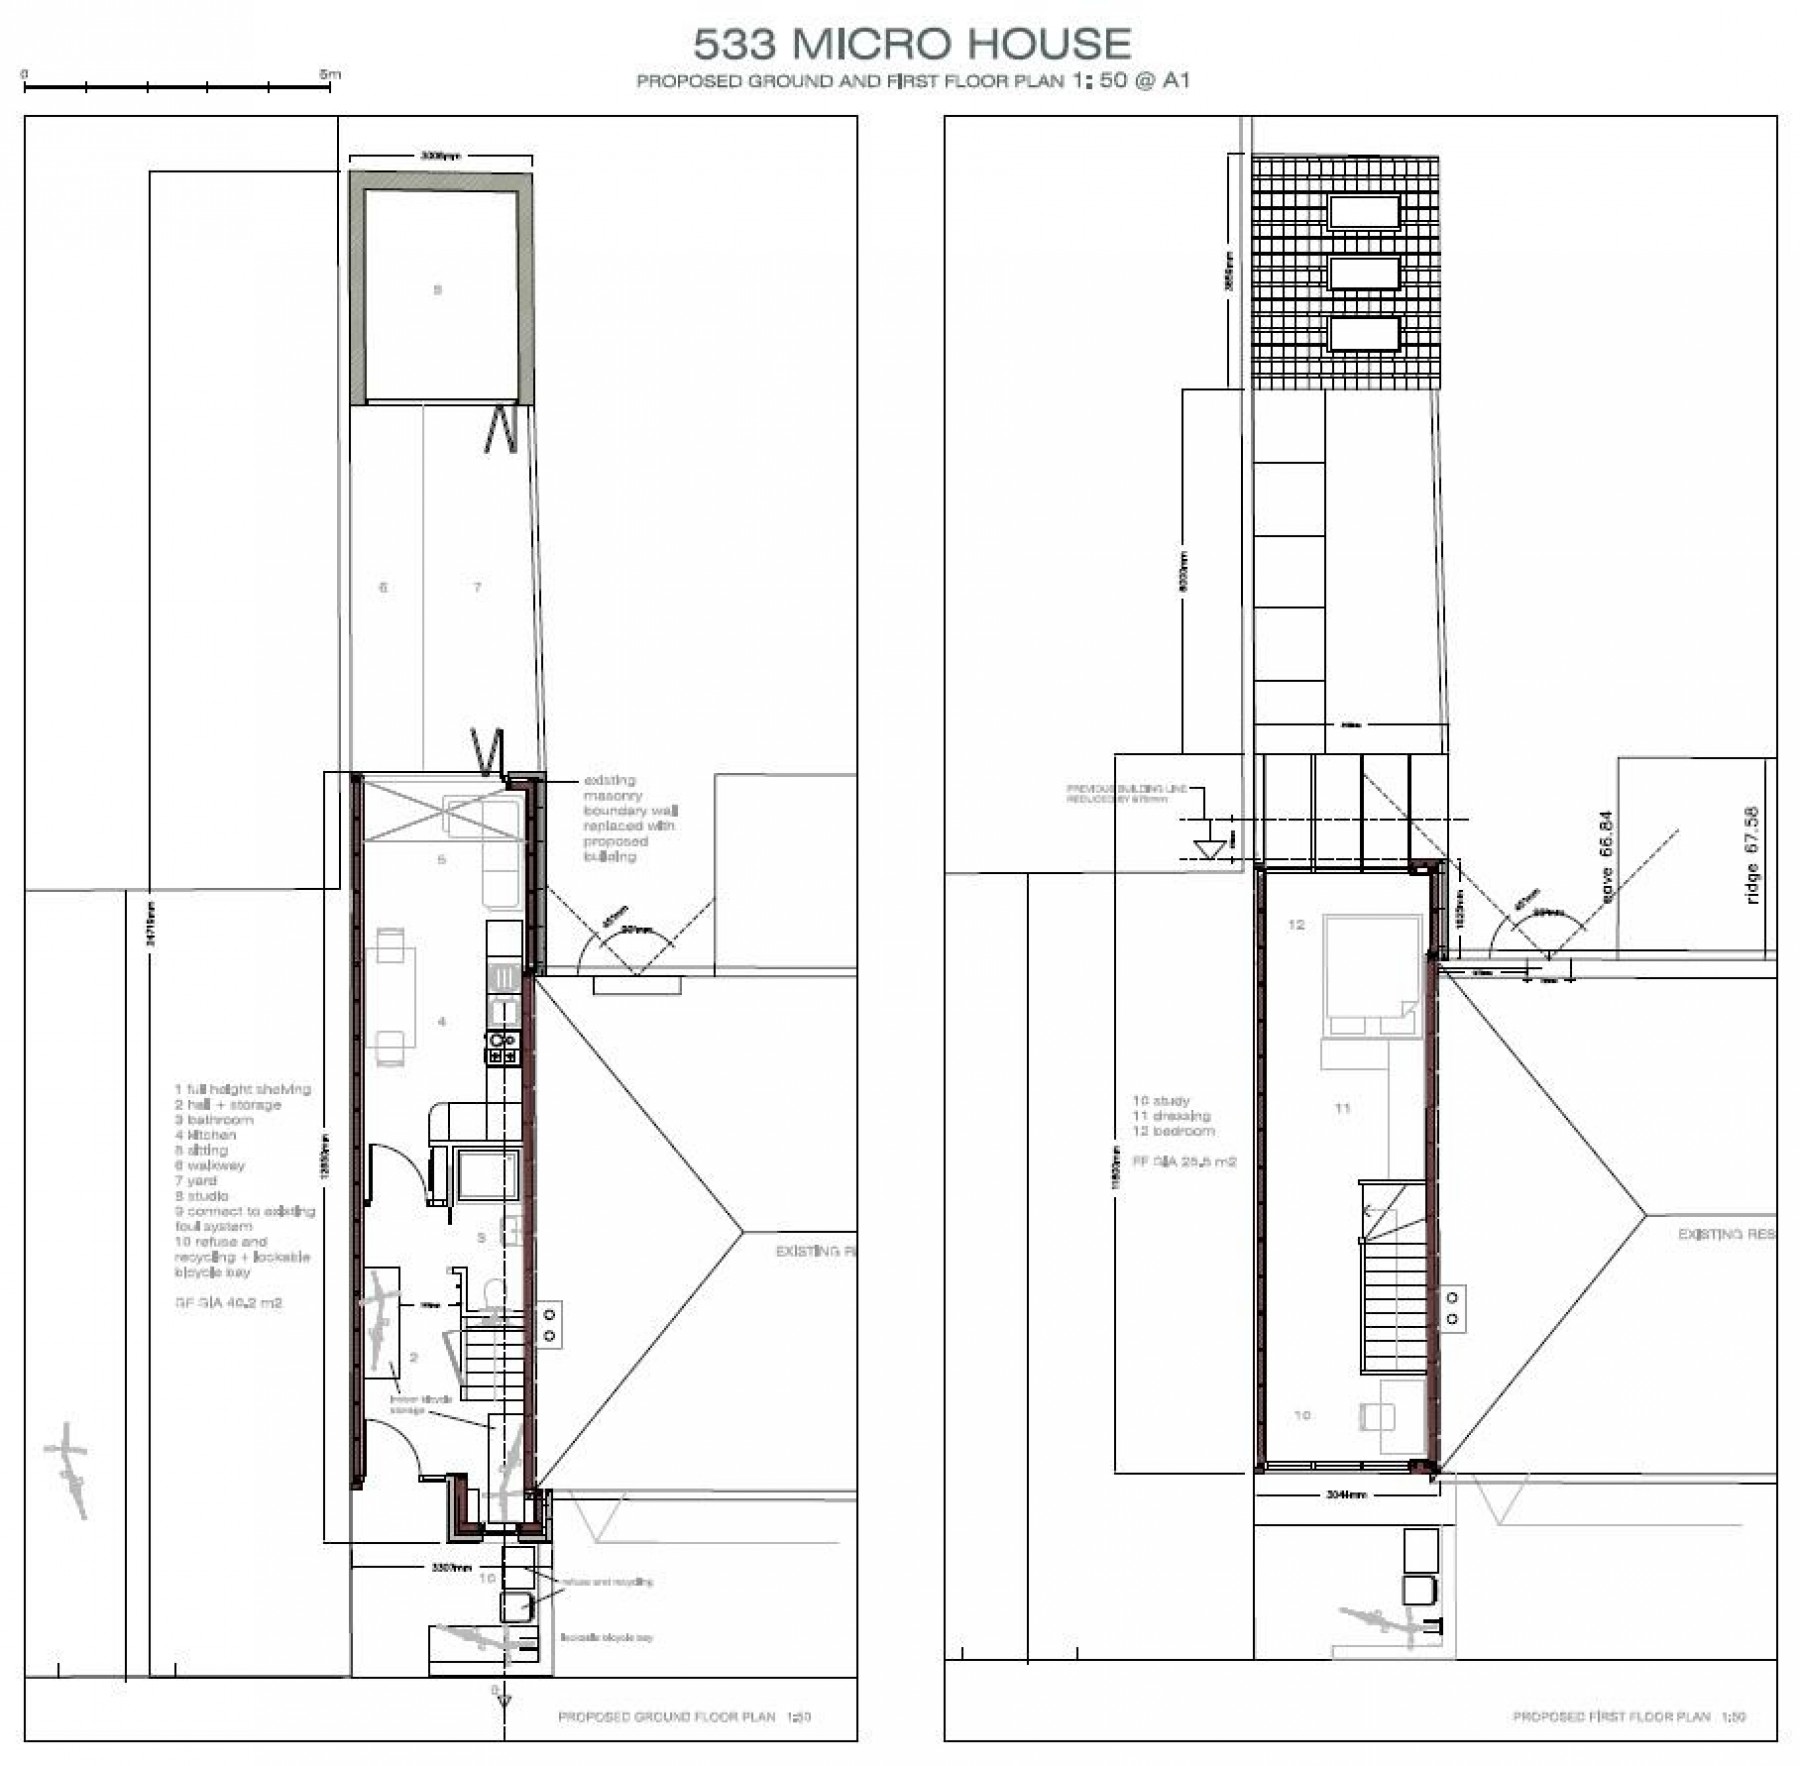 Images for MICRO HOUSE - PLANNING GRANTED